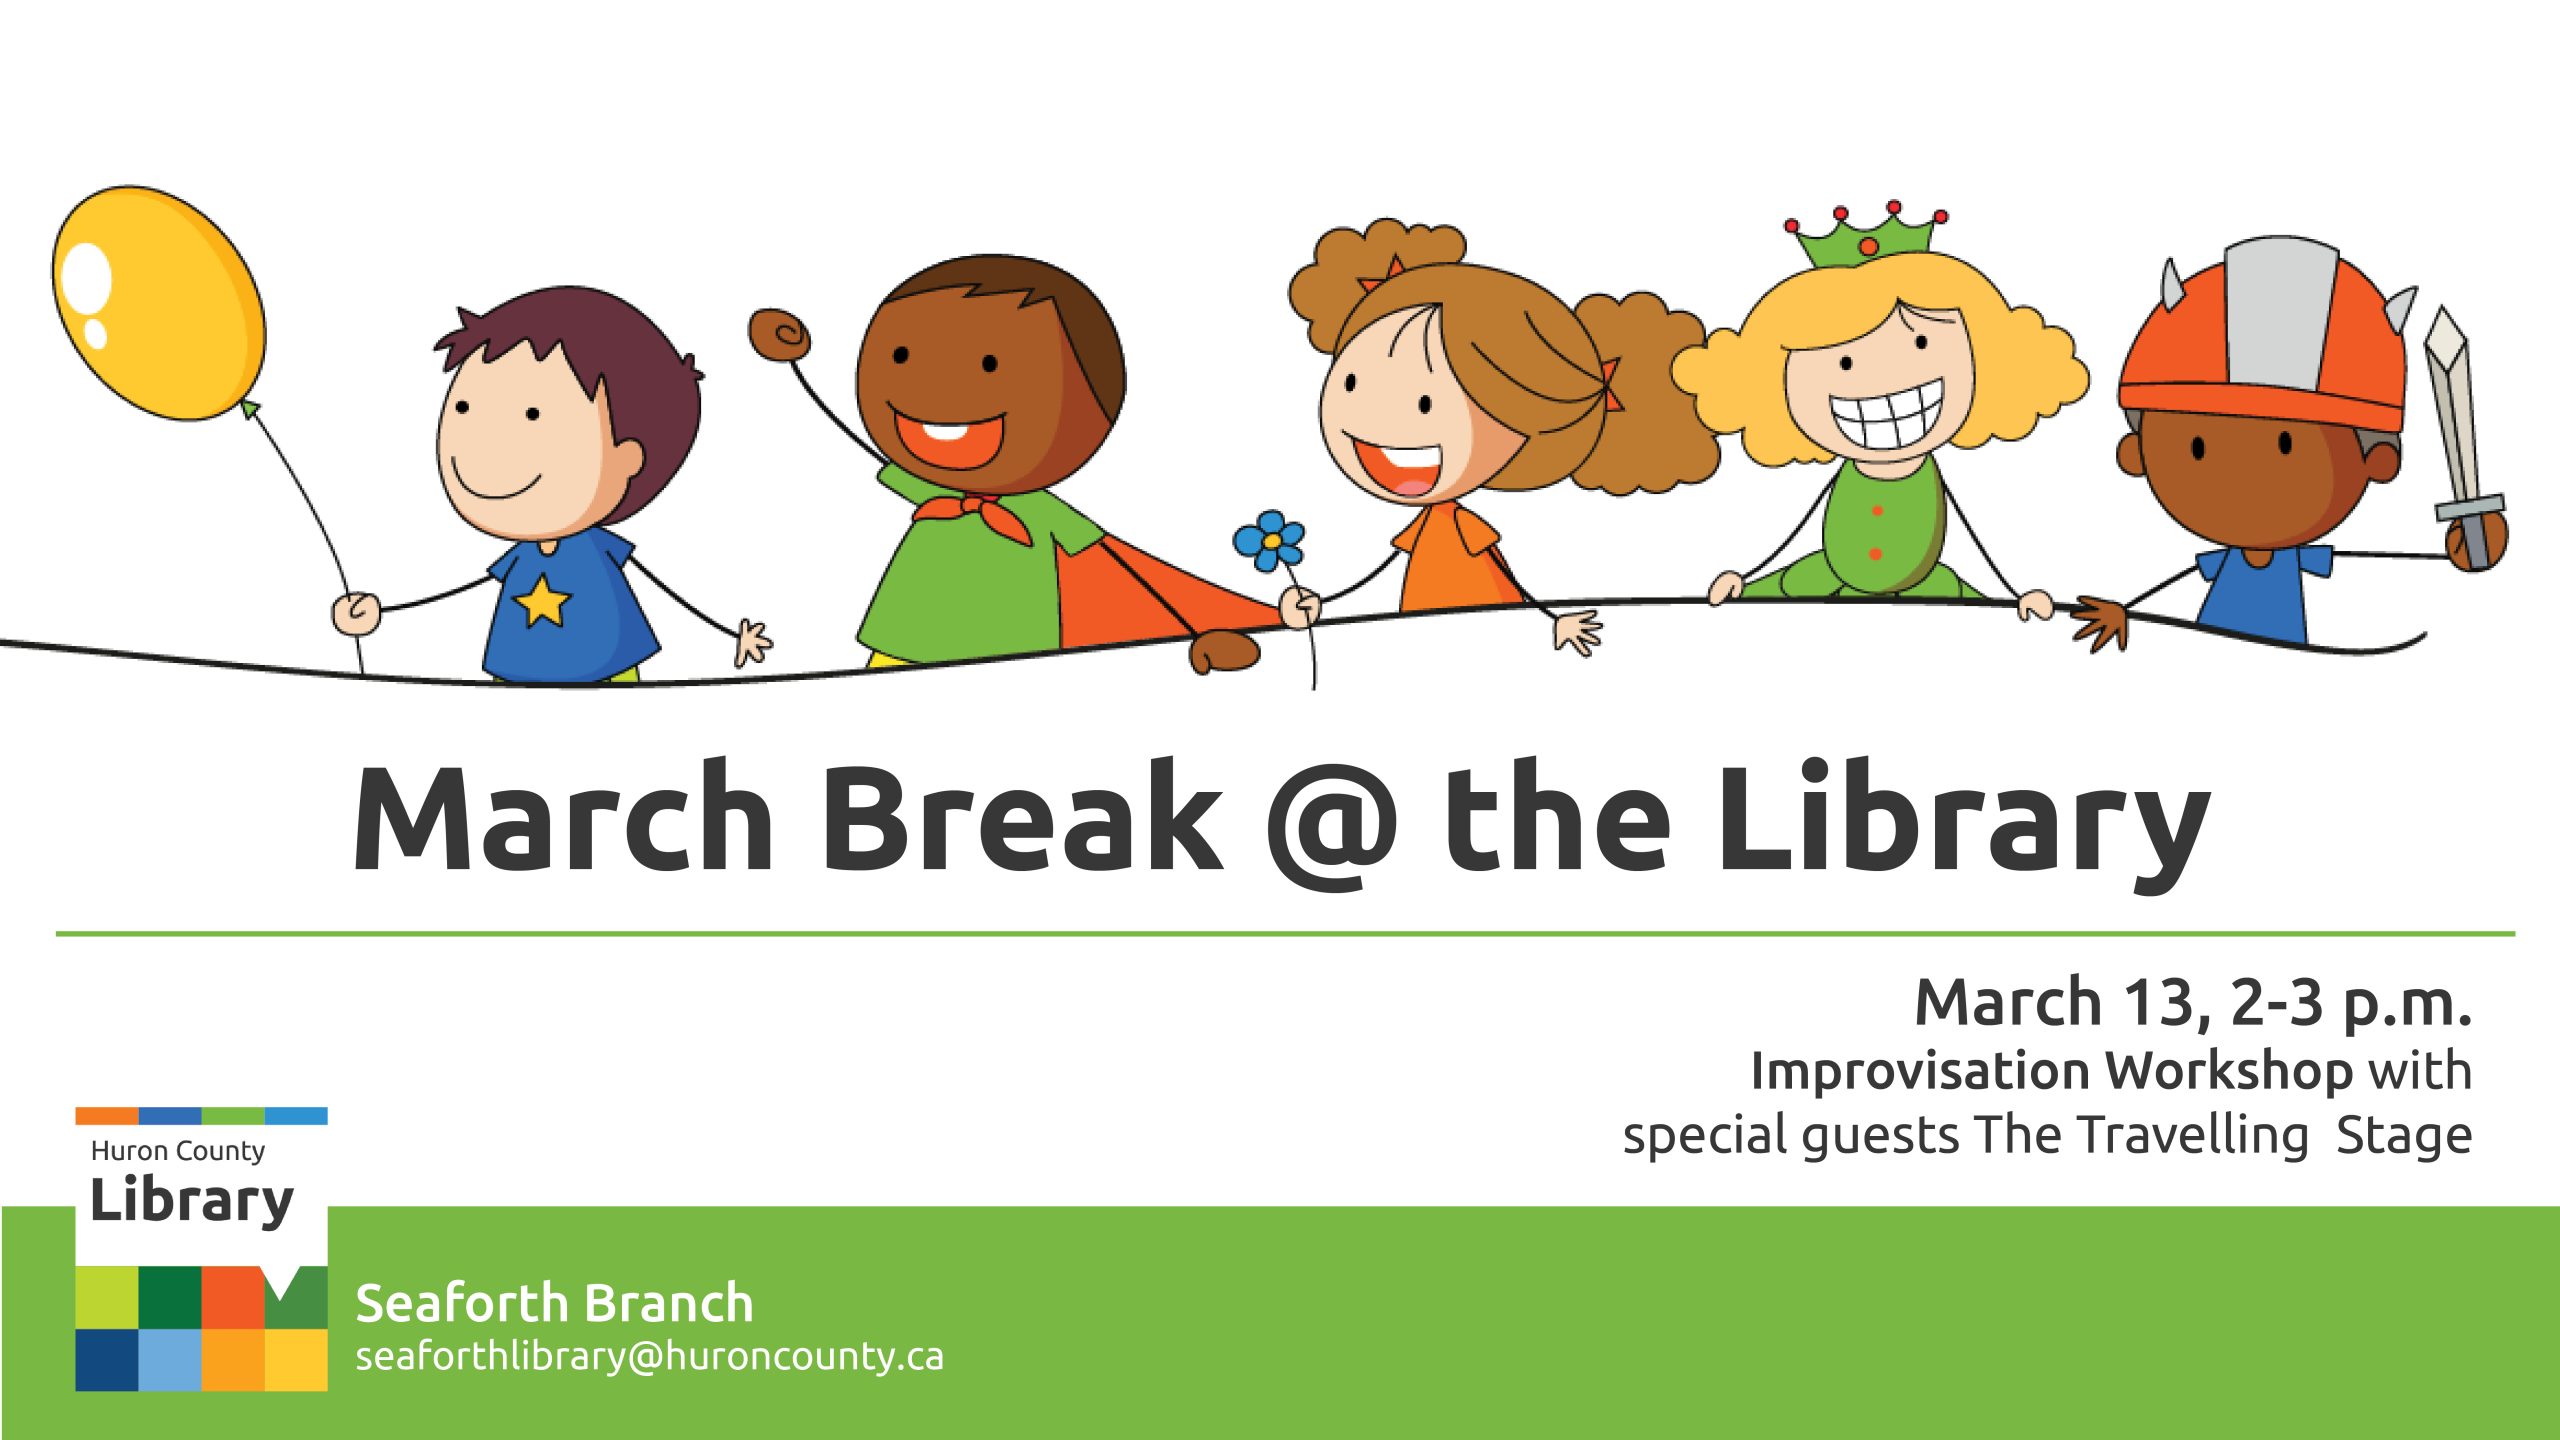 -Illustration of kids having fun with text promoting march break at the Seaforth branch